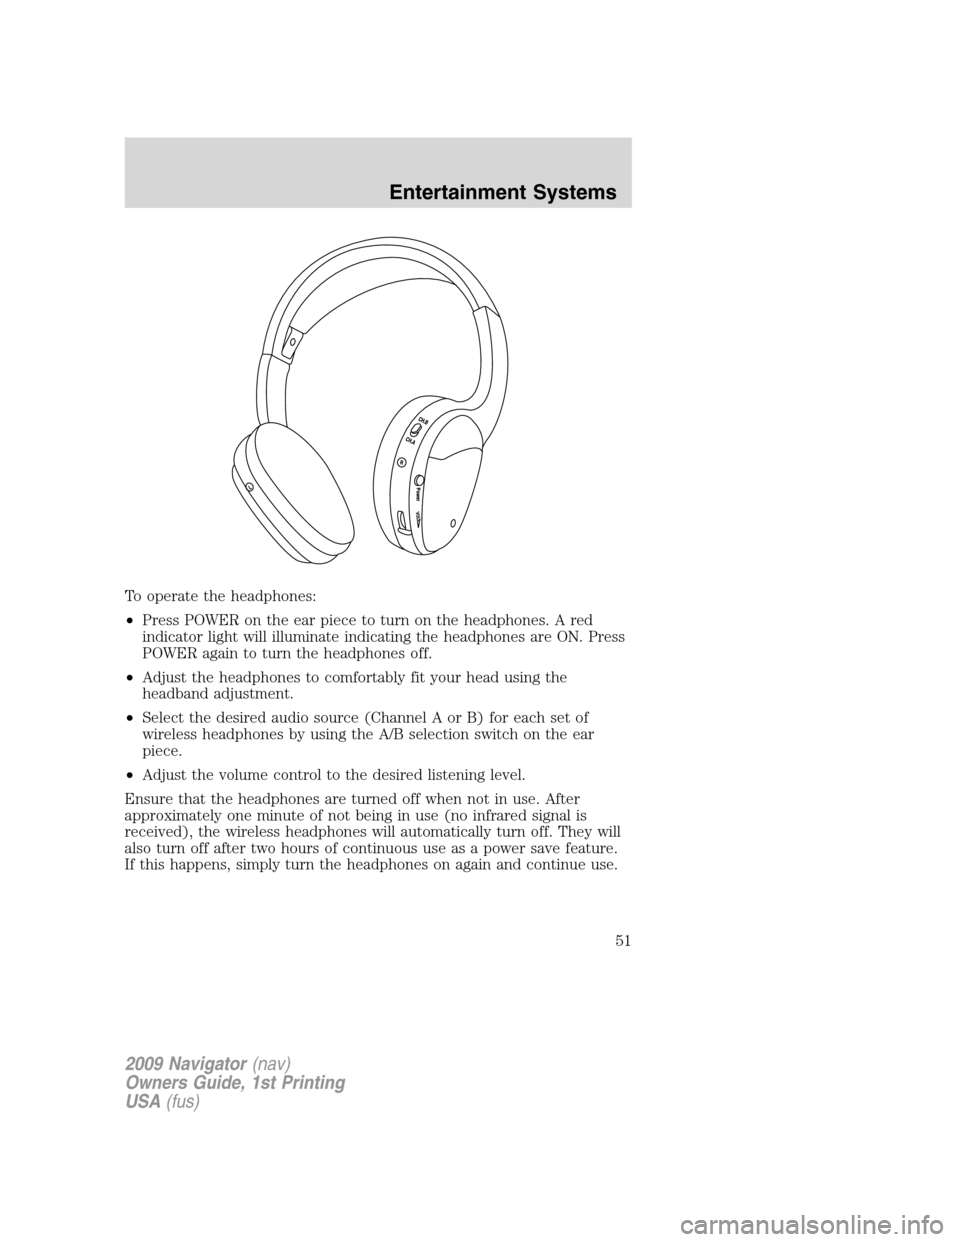 LINCOLN NAVIGATOR 2009 Workshop Manual To operate the headphones:
•Press POWER on the ear piece to turn on the headphones. A red
indicator light will illuminate indicating the headphones are ON. Press
POWER again to turn the headphones o